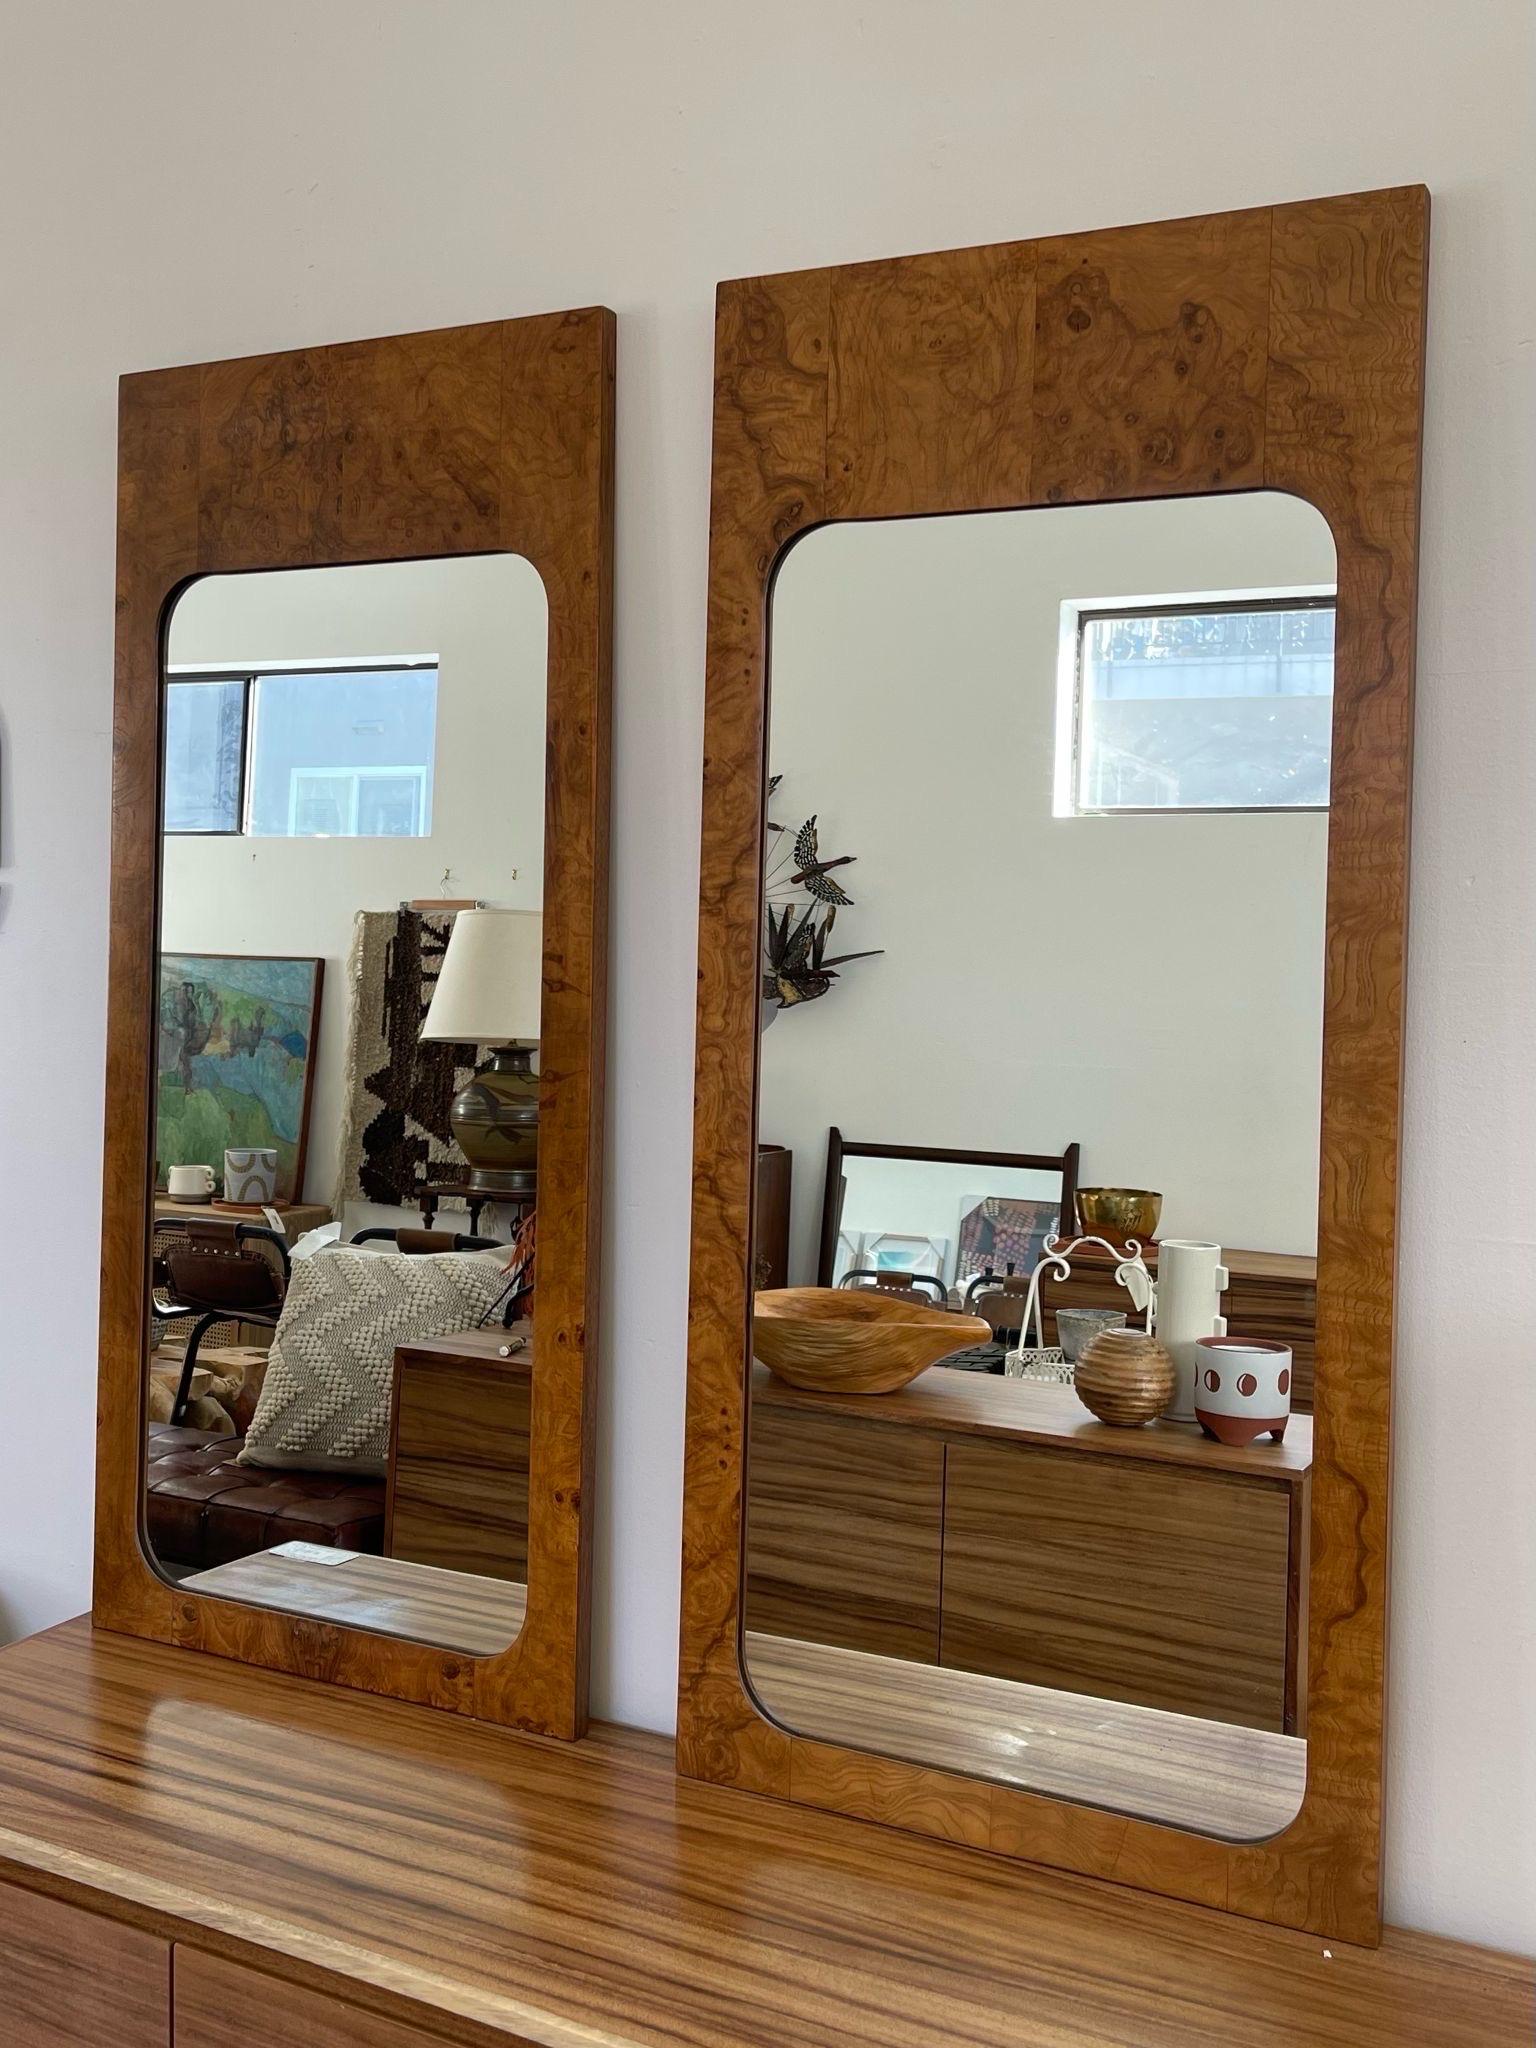 Mid Century Modern wall Mirror Pair. Circa 1970. Produced by Lane Furniture as part of their “Alpha” Collection. This is a Set priced individually on a separate Postings. Vintage Condition Consistent with Age as Pictured.

Dimensions. 21 1/4 W ; 1 D